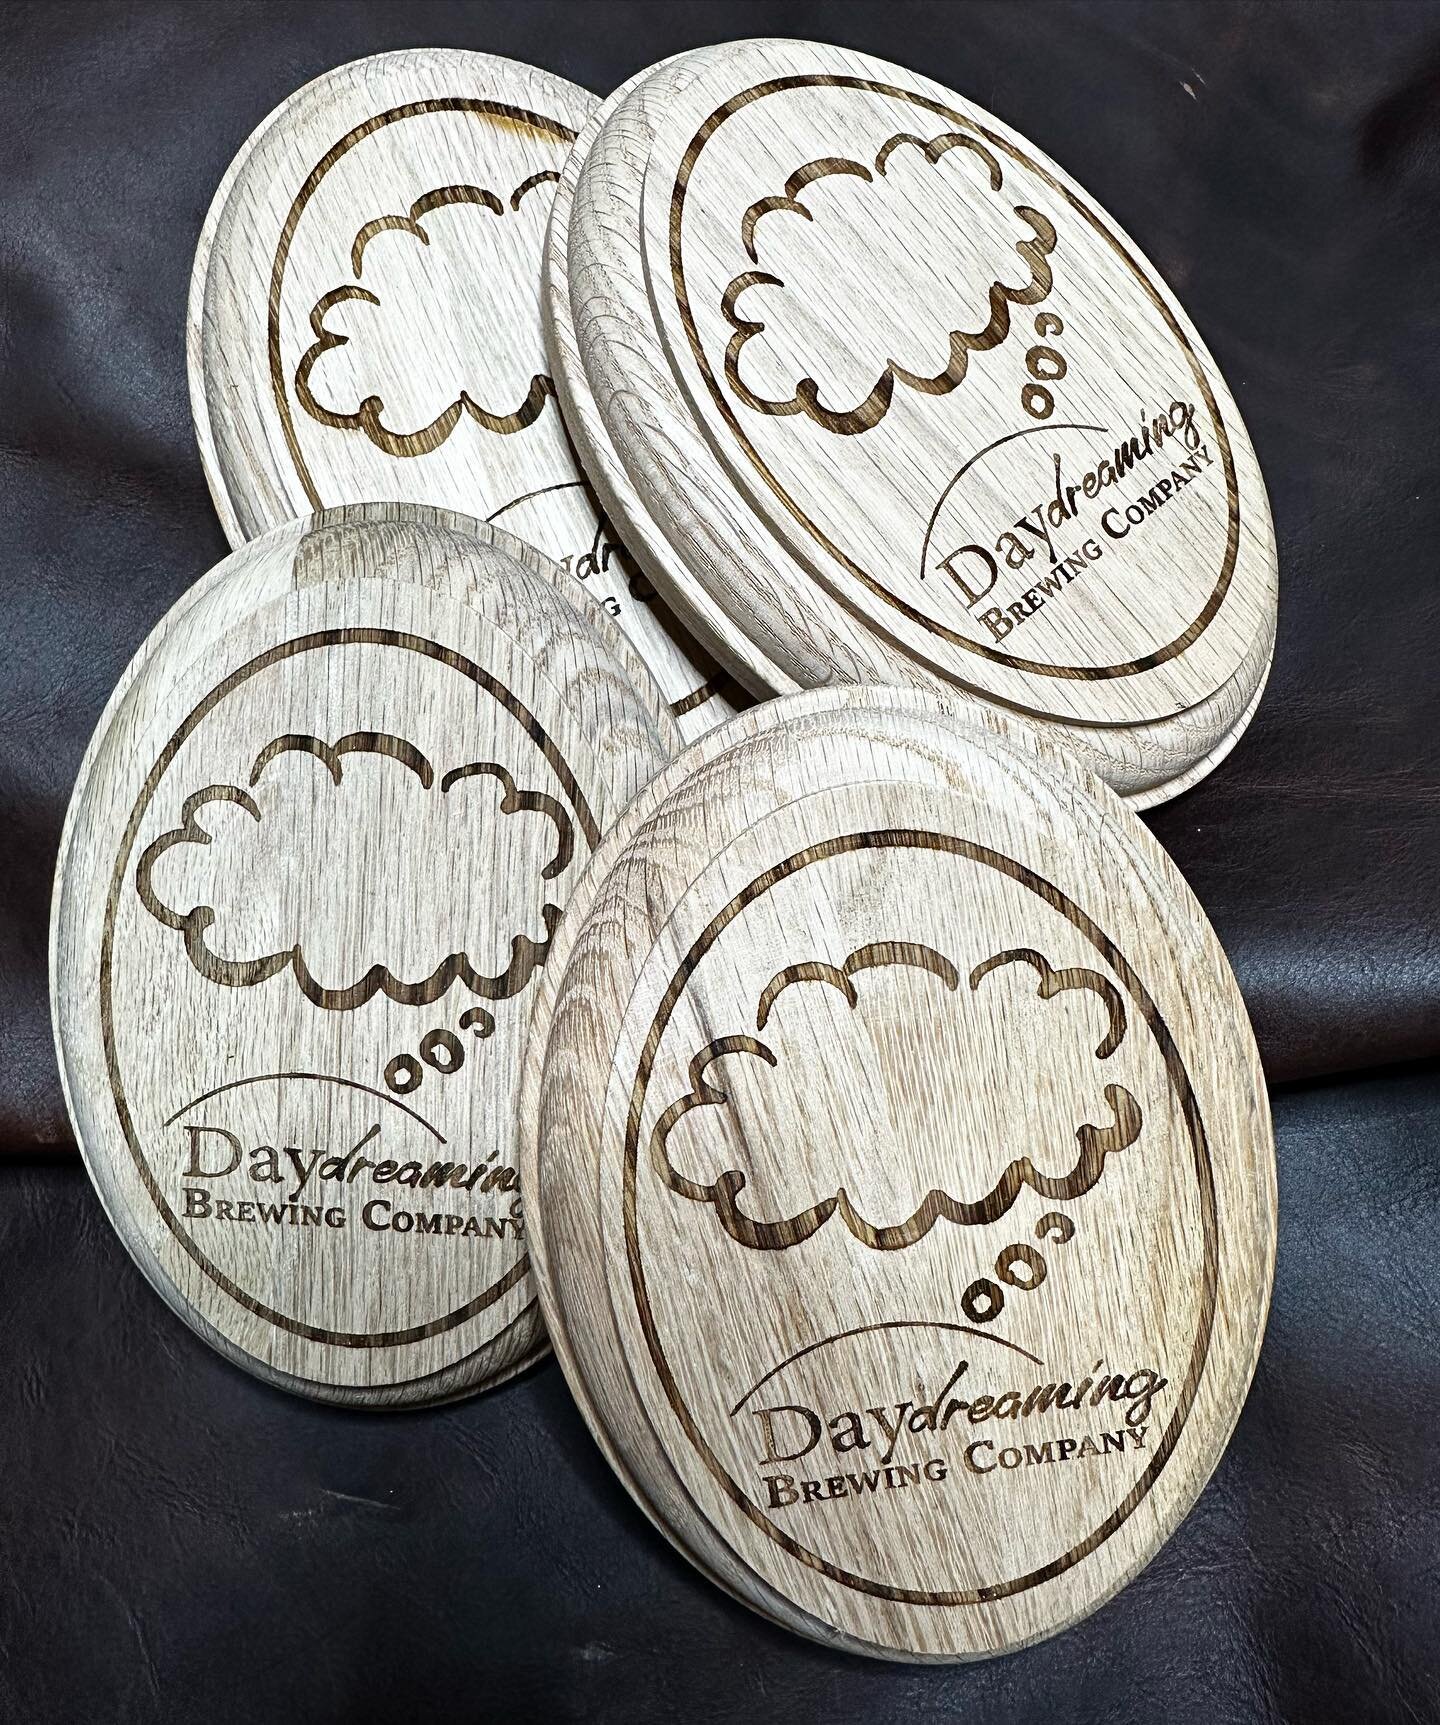 Some pump clip badges for @daydreamingbc! Super fun project for my friend @theandyday.